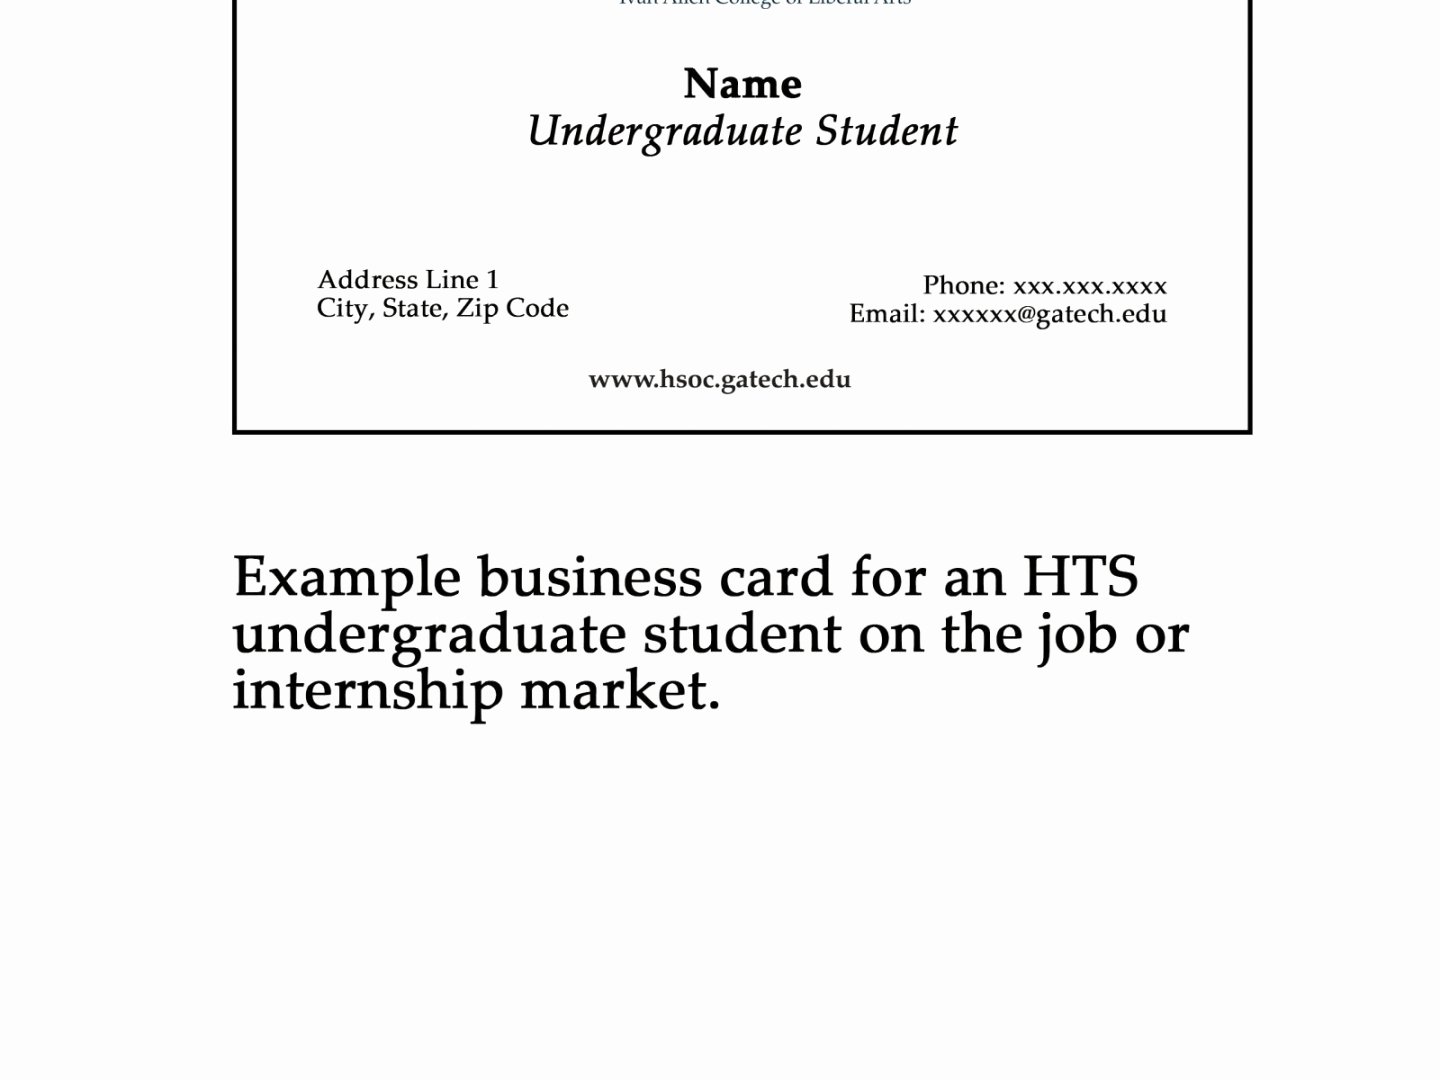 Student Business Card Examples Awesome Graduate Student Business Cards